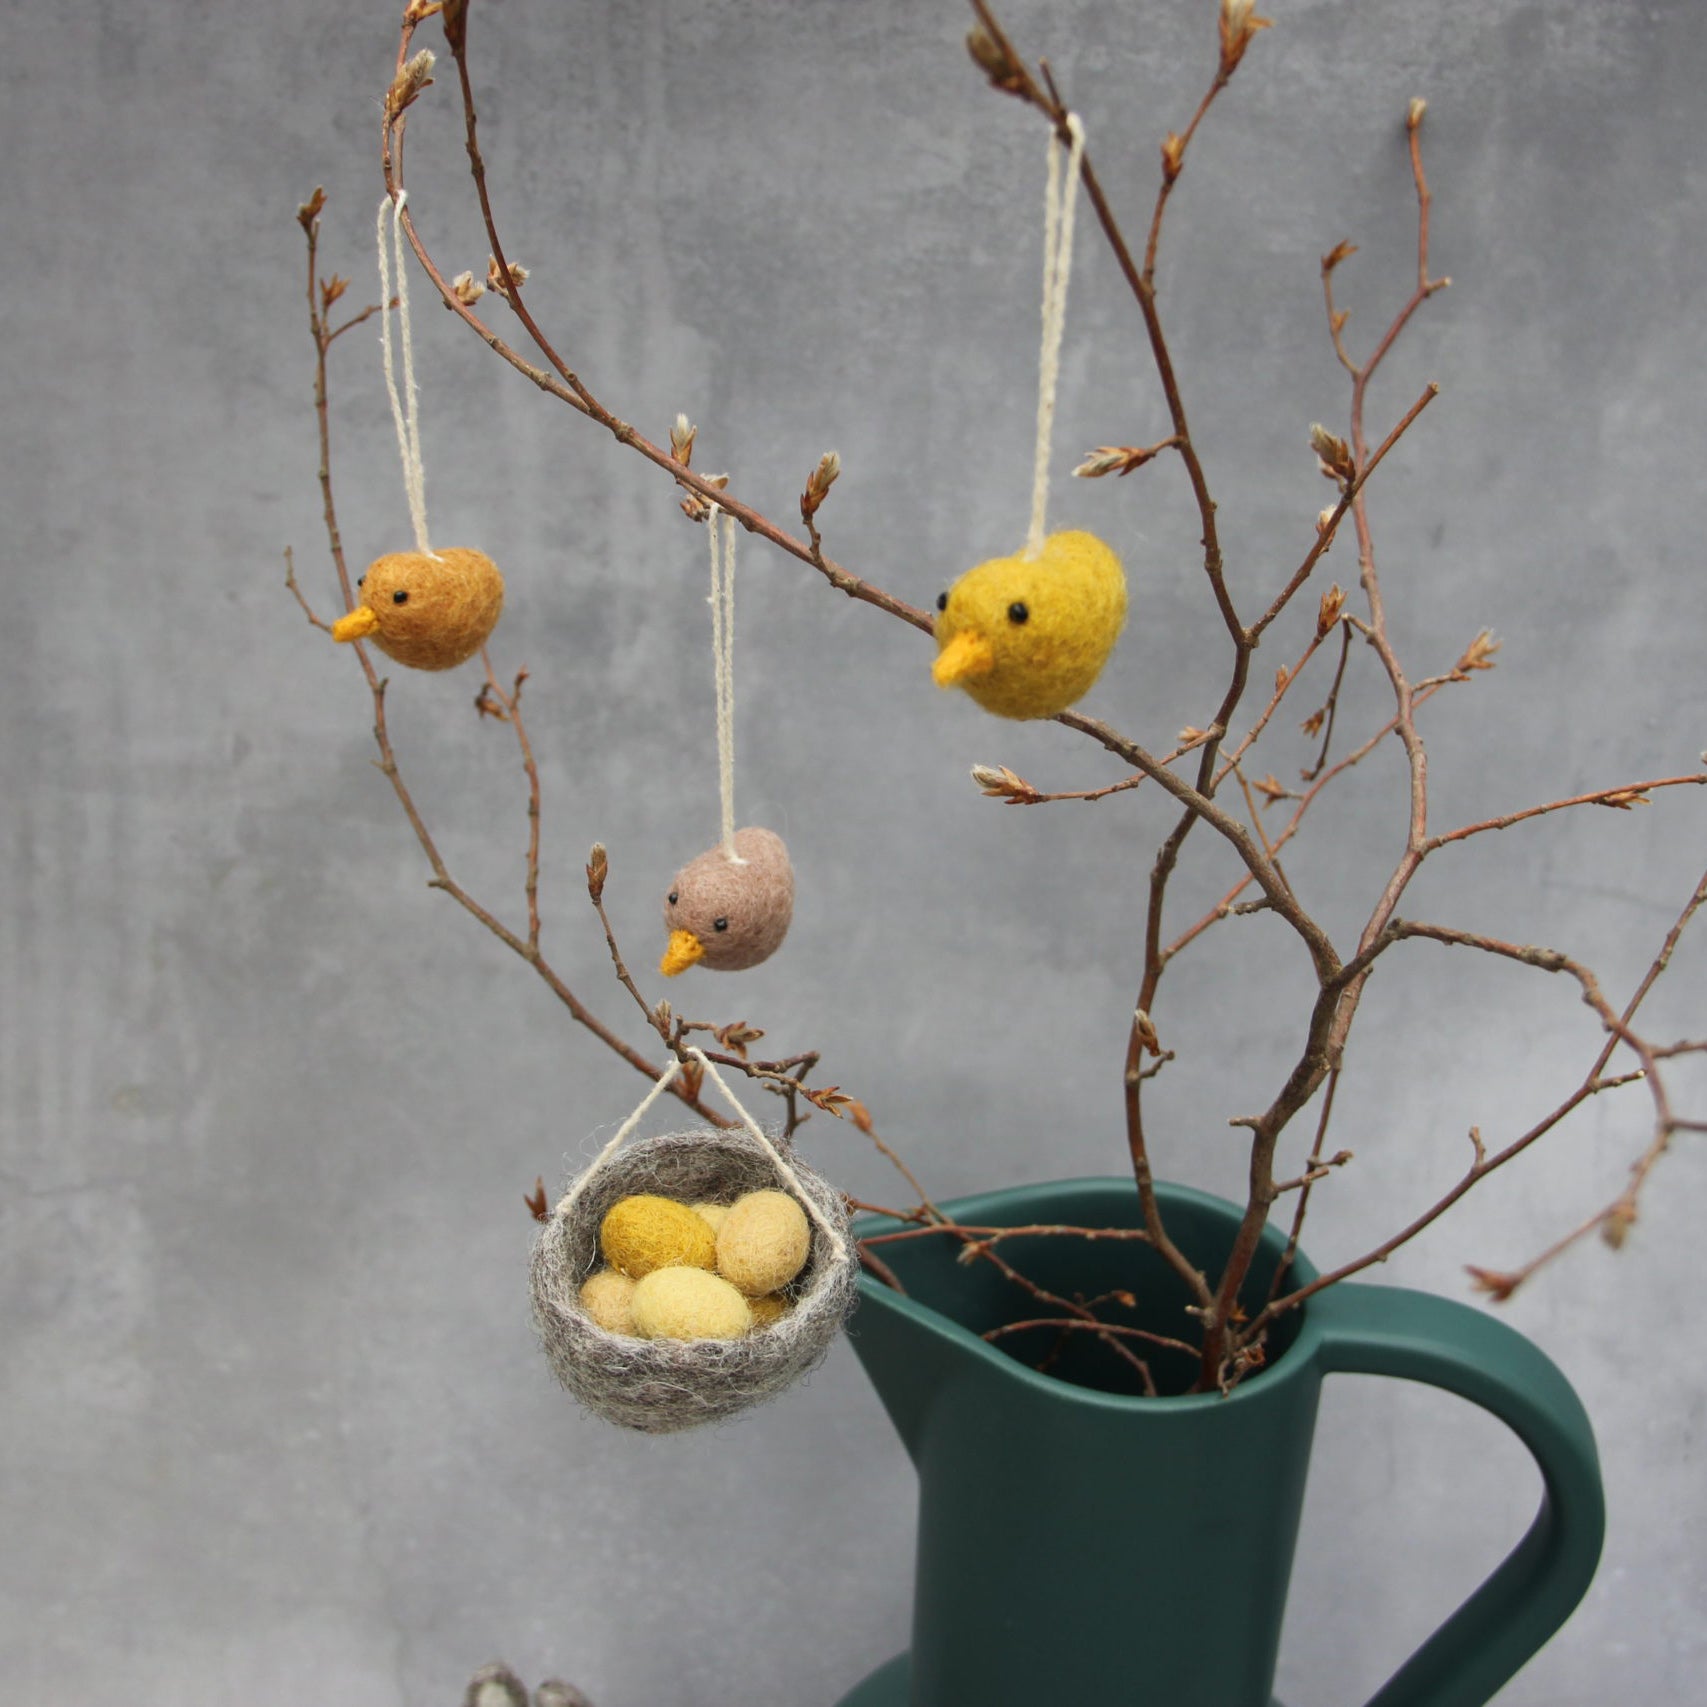 En Gri & Sif Felt birds hanging on twigs with a little hanging grey nest with eggs